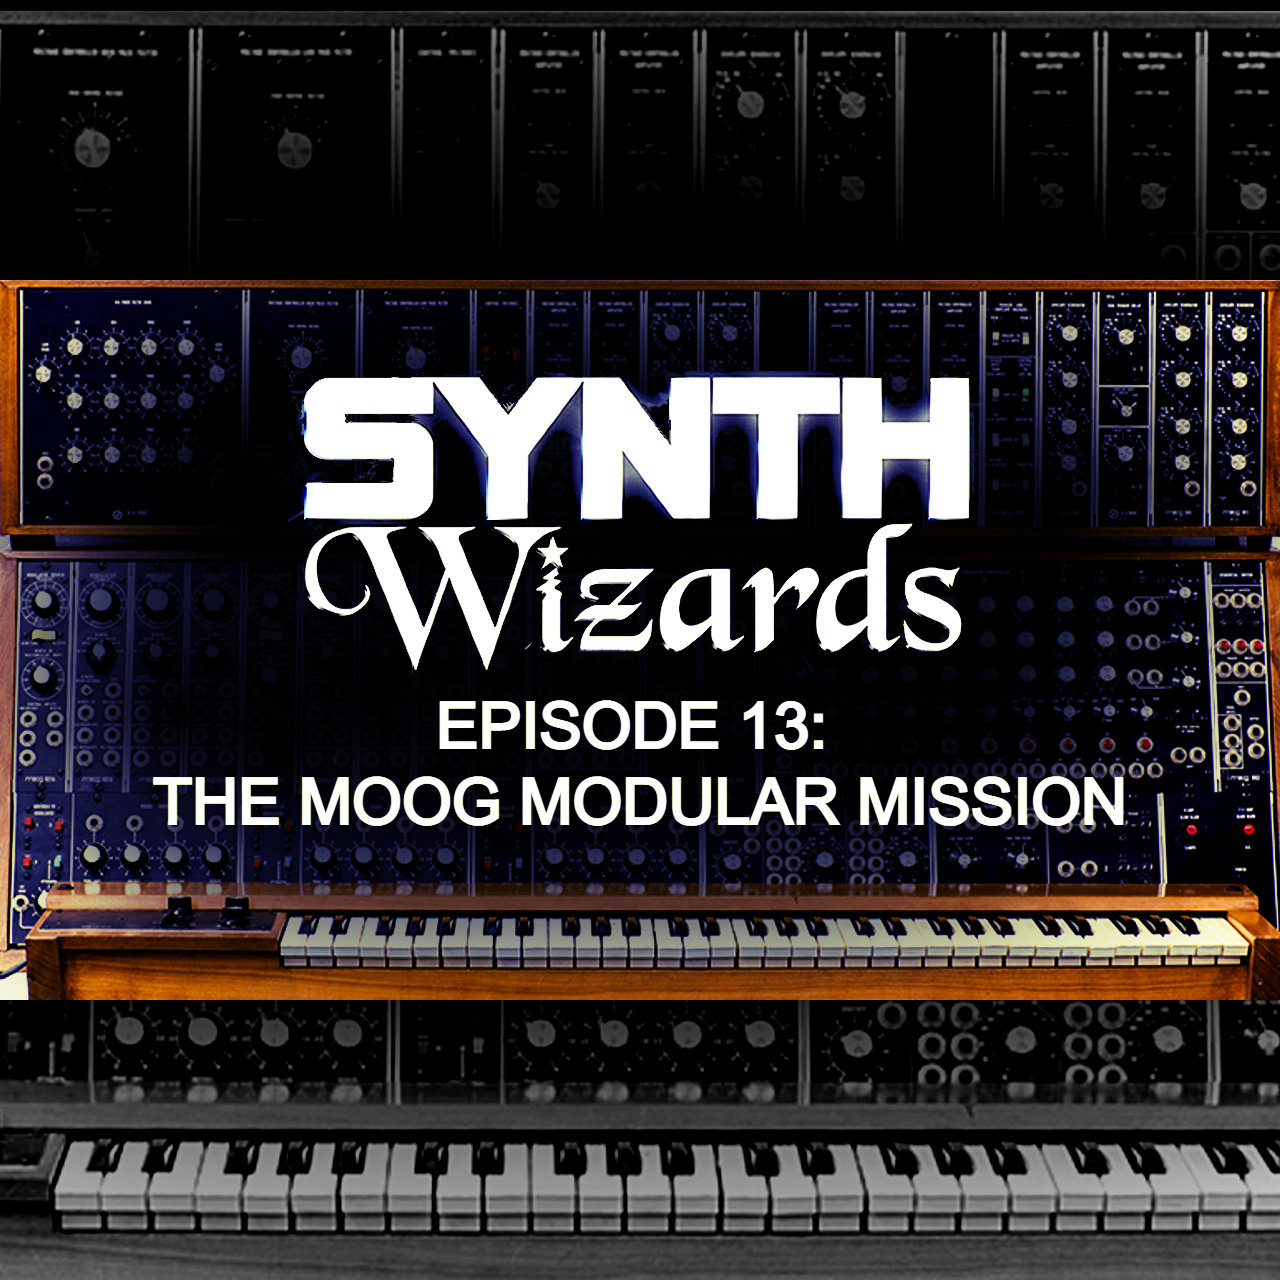 Synth Wizards Episode 13: The Moog Modular Mission